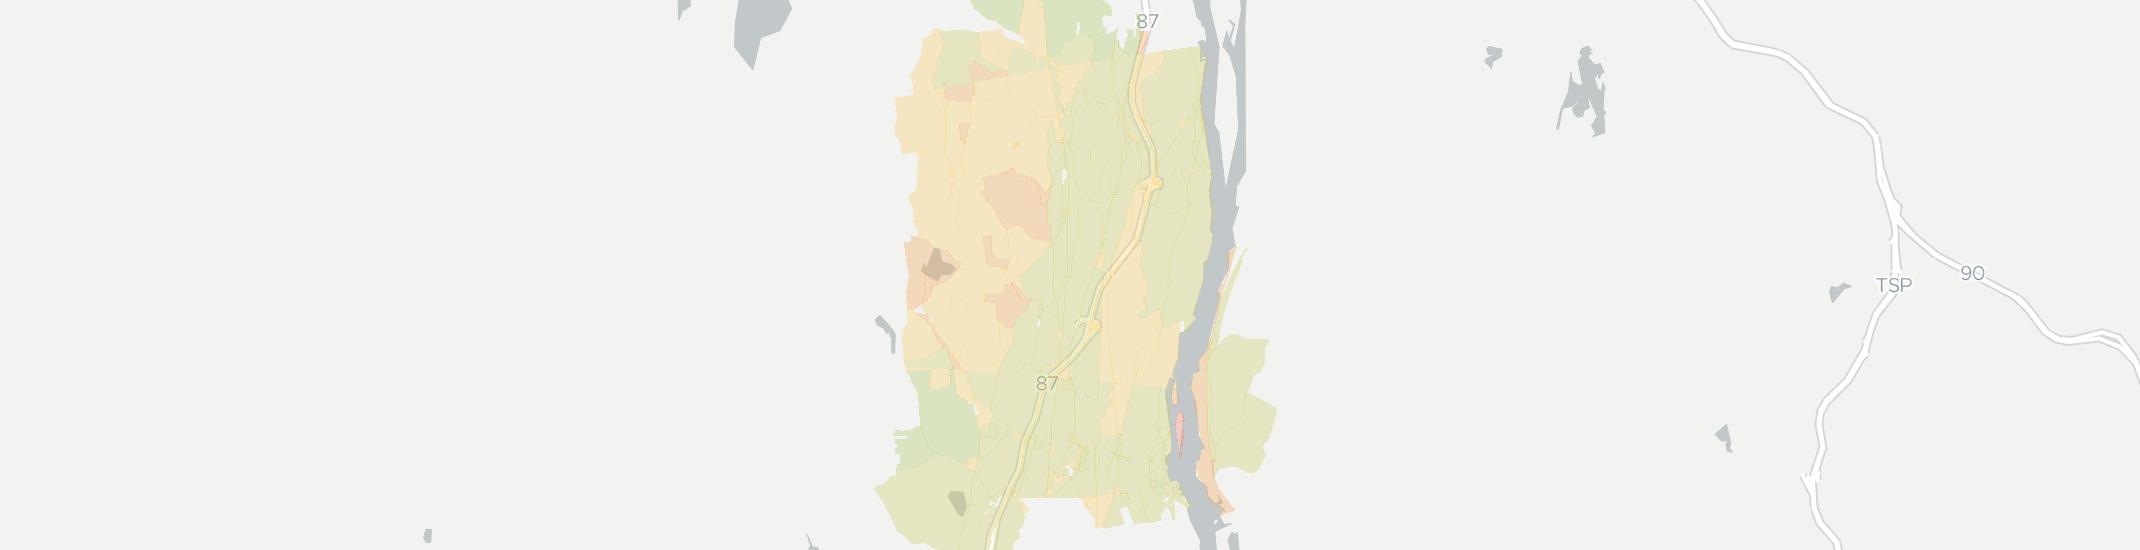 West Coxsackie Internet Competition Map. Click for interactive map.